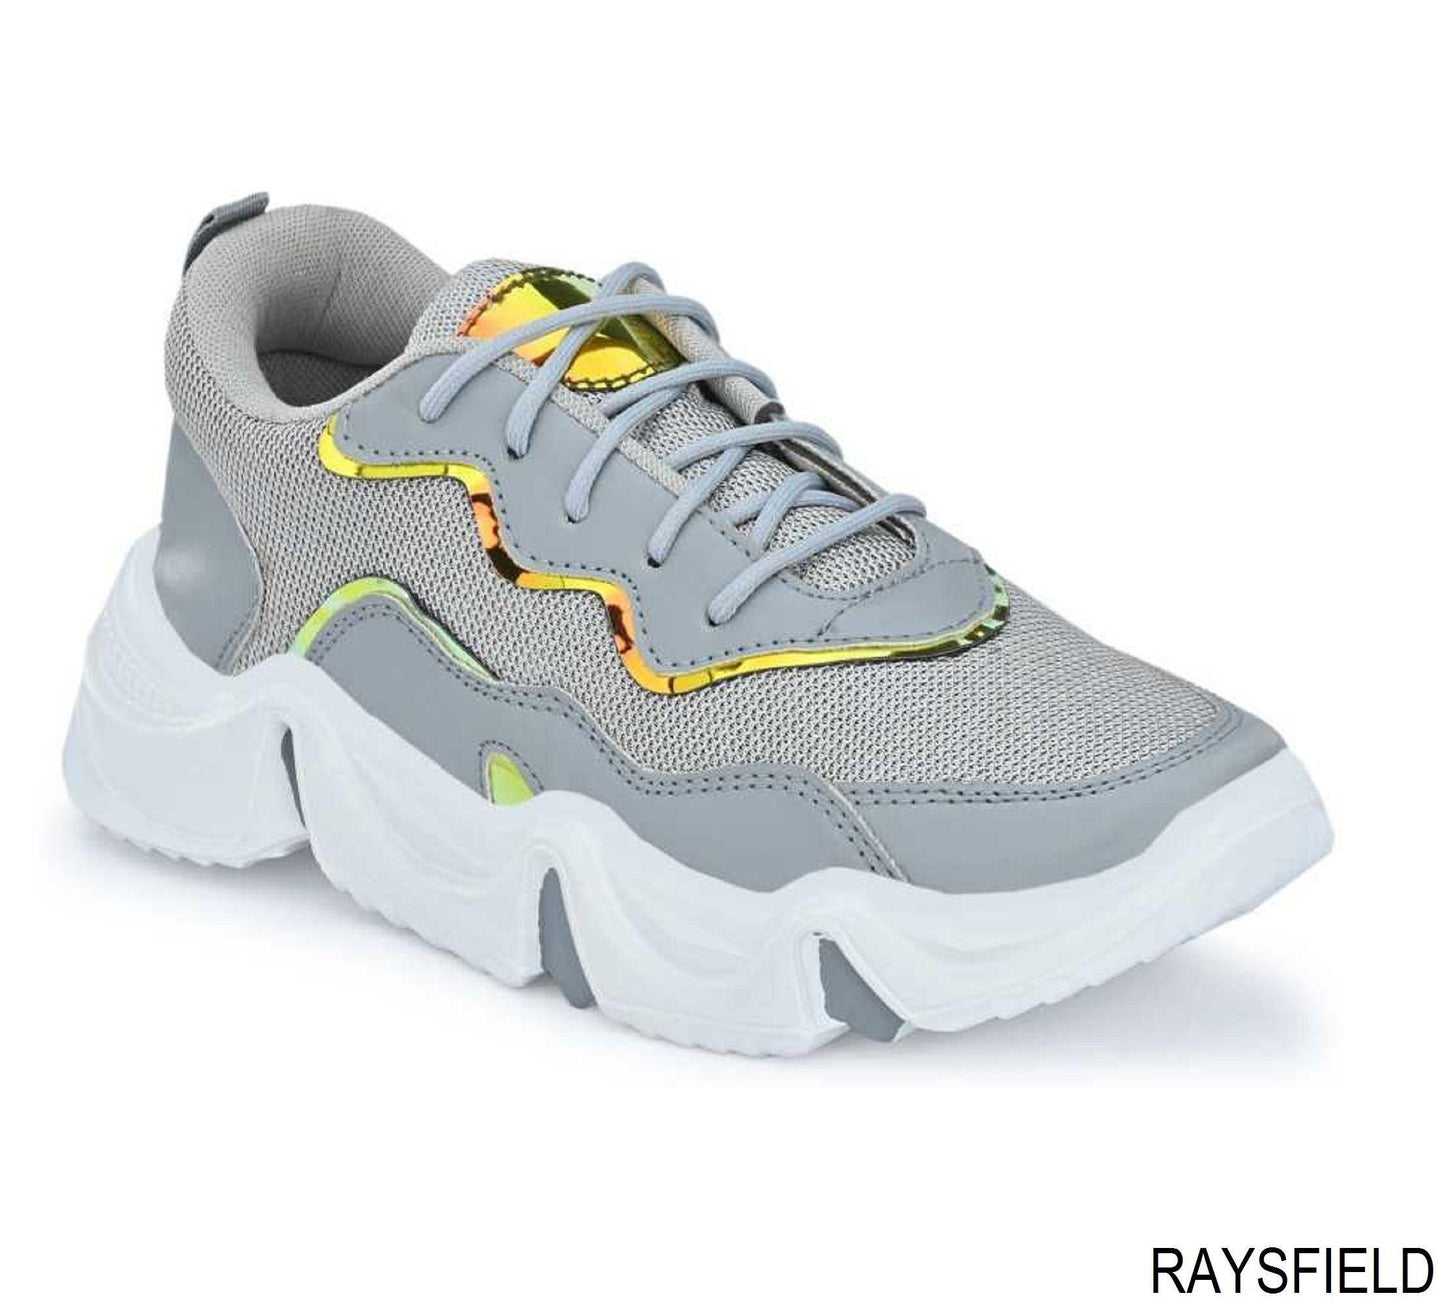 Raysfield Men's stylesh sports casual shoes